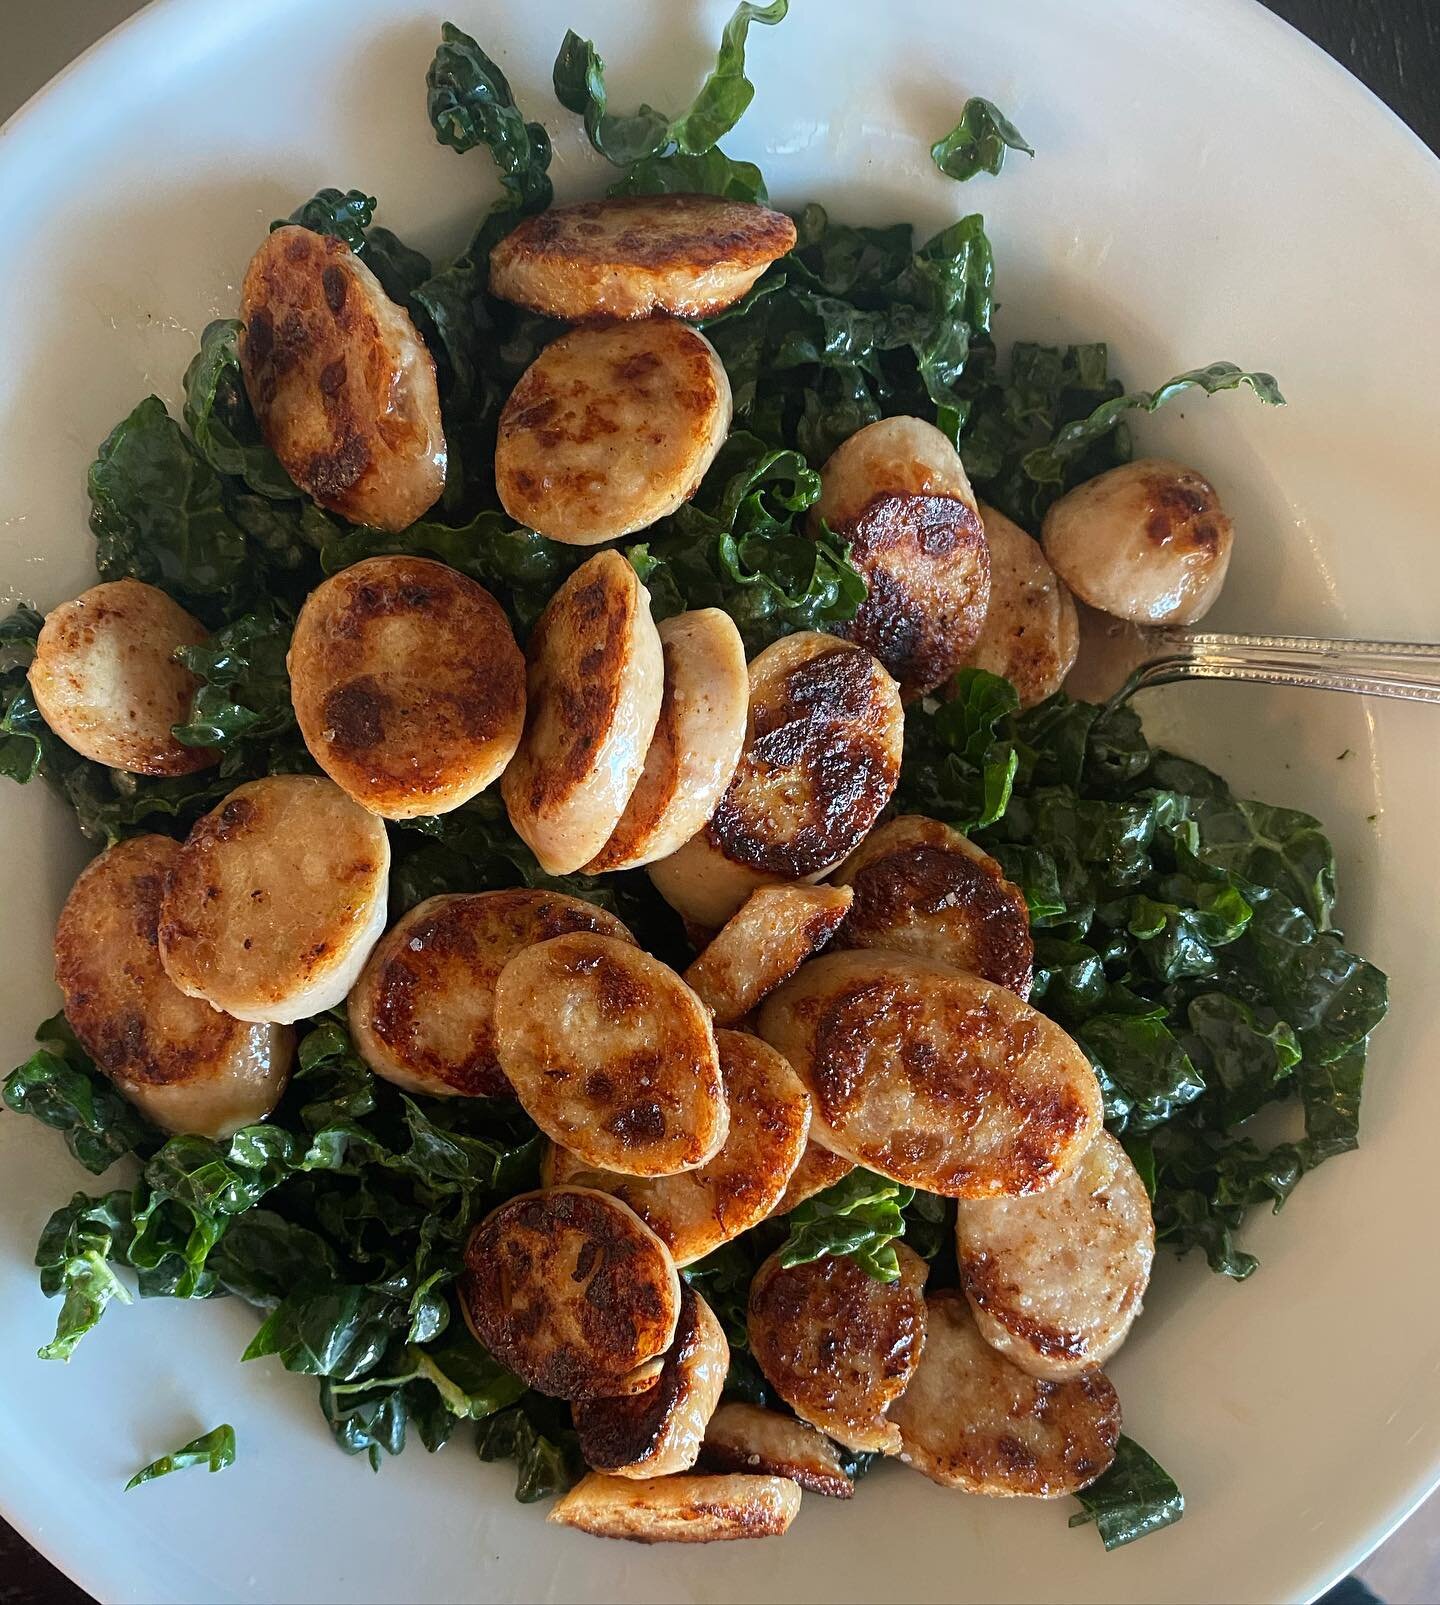 If you need some salad inspiration this week, I have this humble offering. It&rsquo;s not fancy, but it&rsquo;s tasty and comes together quick! Chicken apple sausage salad with lemon honey vinaigrette.

Here&rsquo;s what you do: 

1. remove ribs from